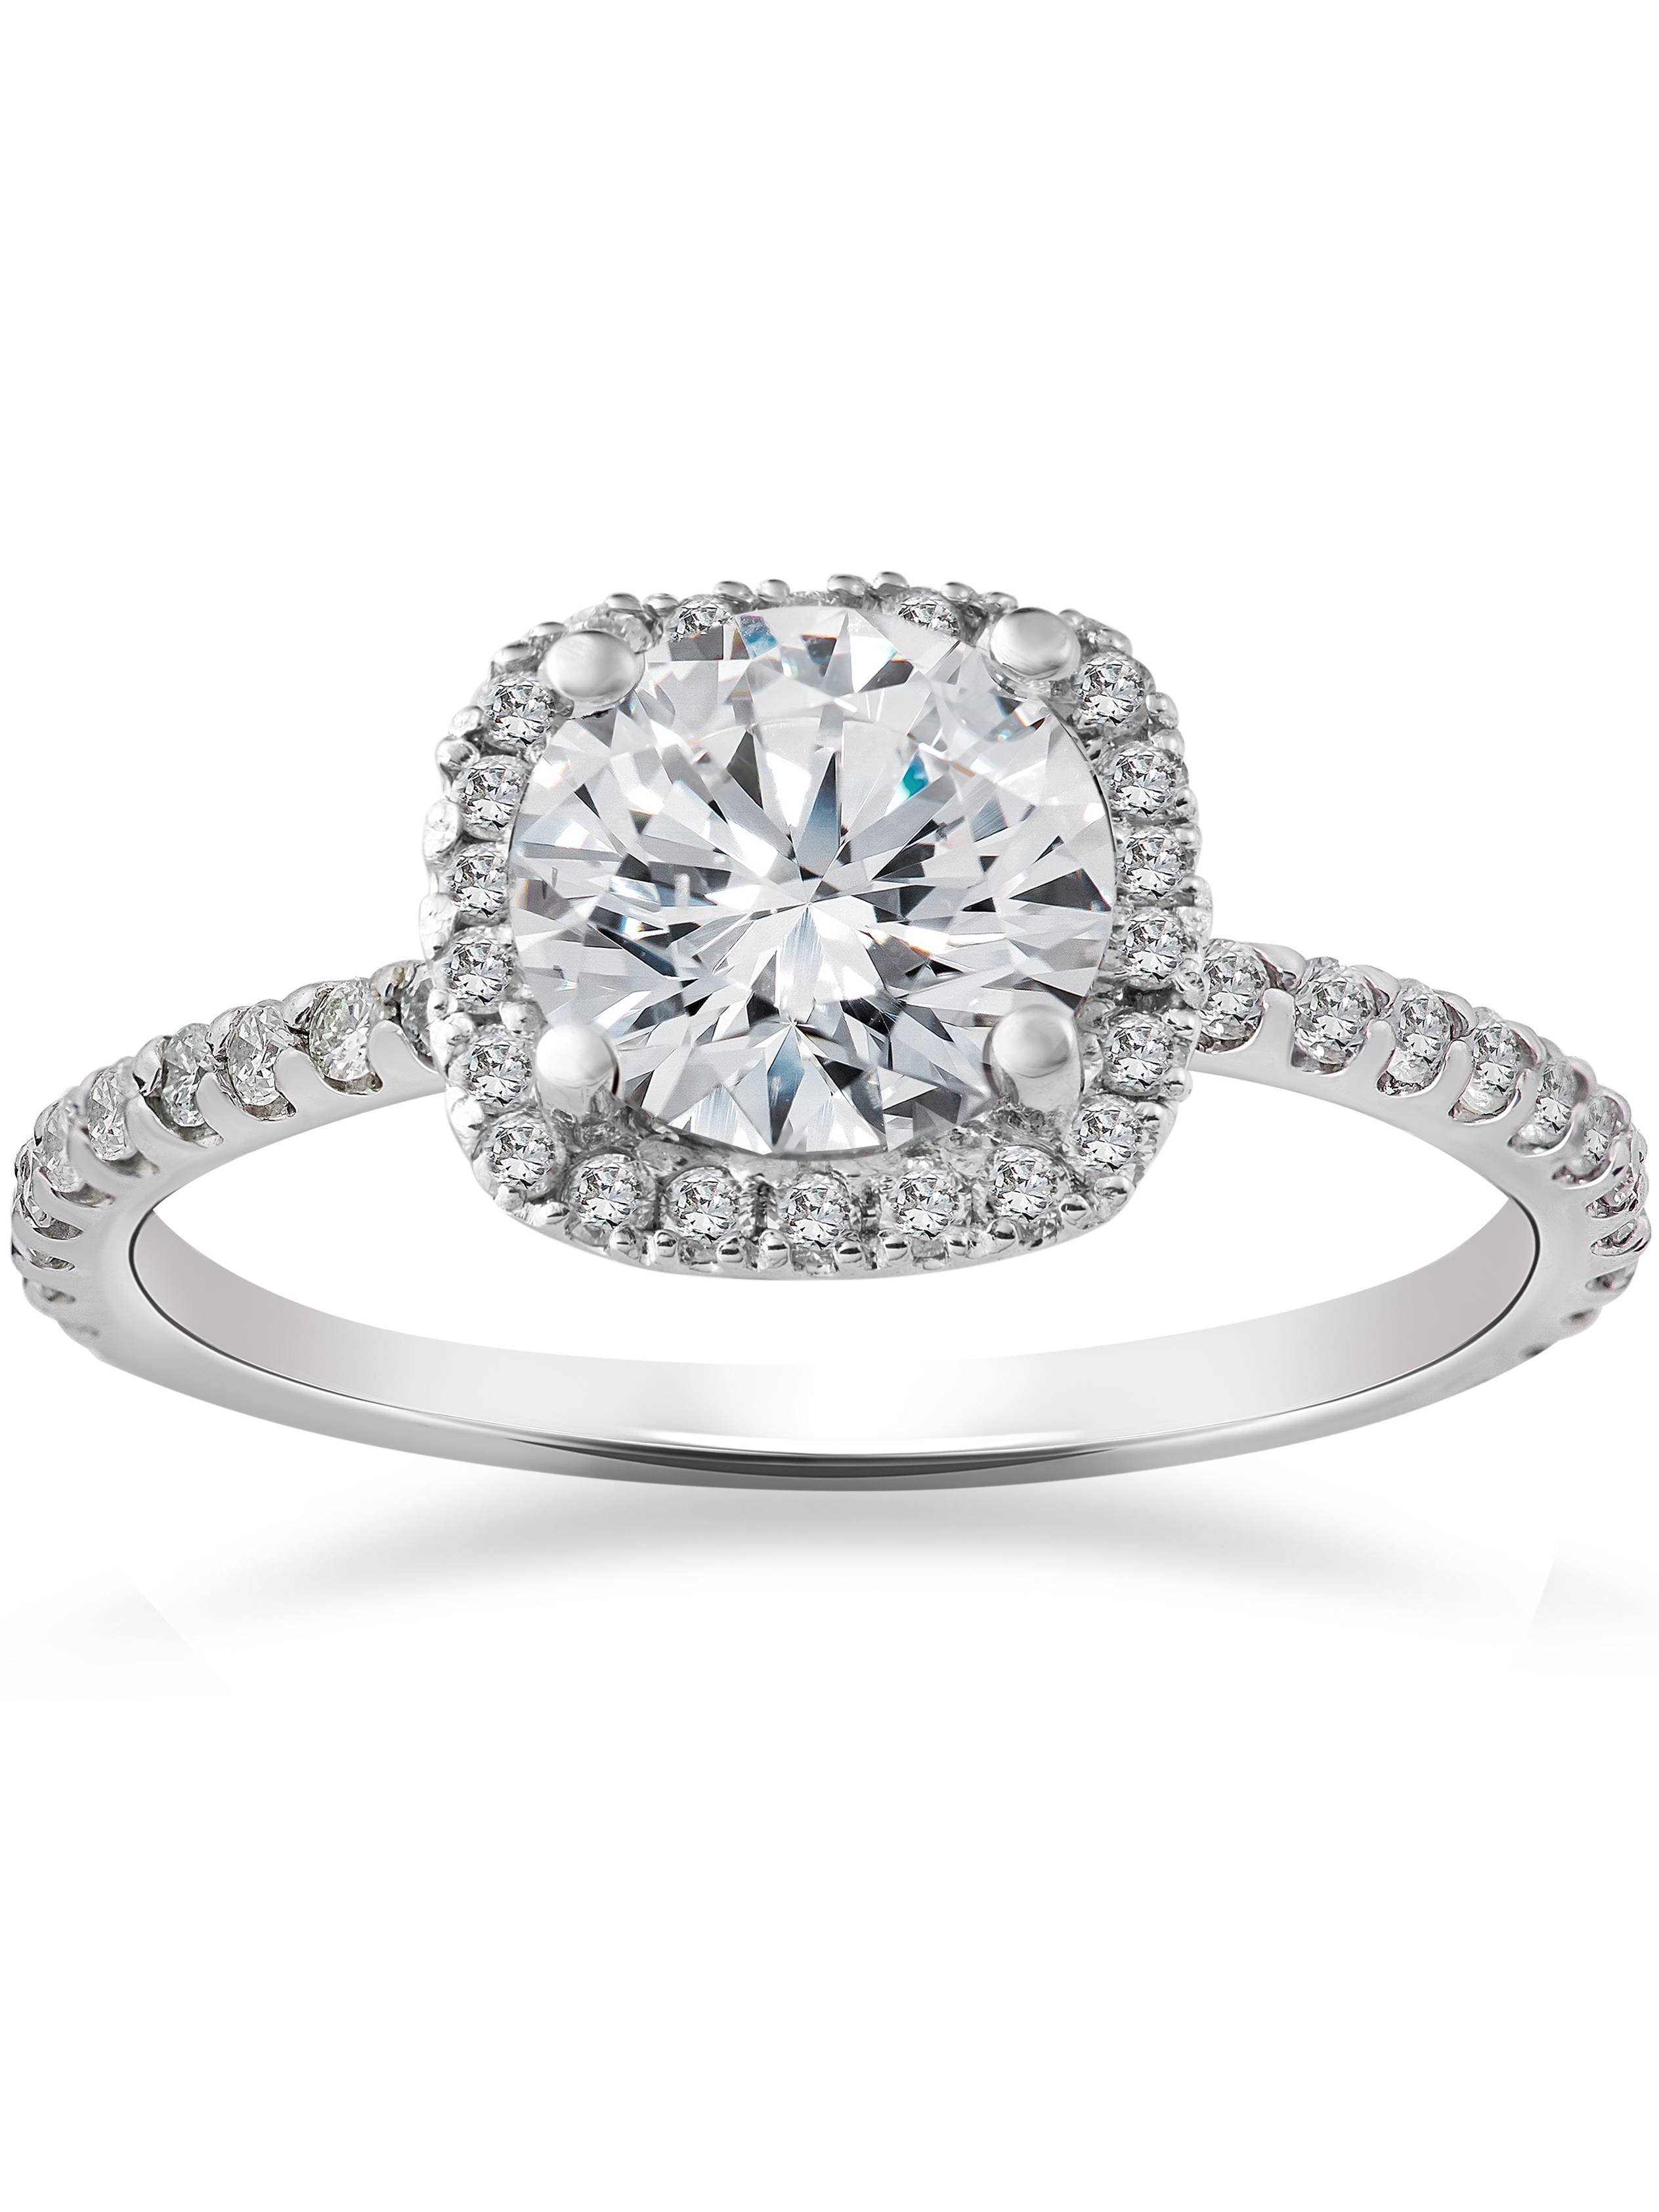 14K White Gold 2 Ct Round Cut Diamond Solitaire Engagement Ring 